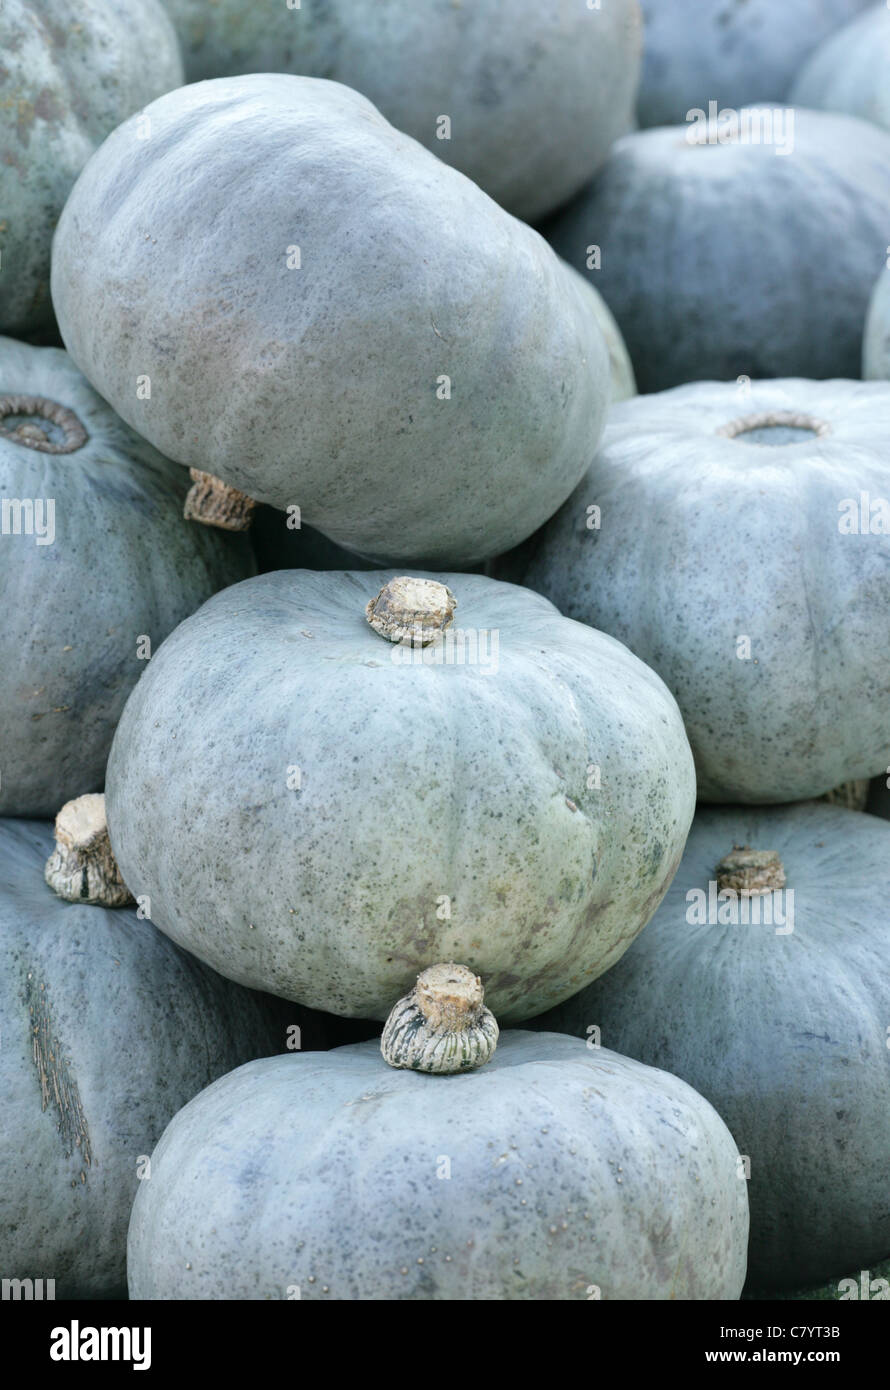 crown prince squash in a pile Stock Photo